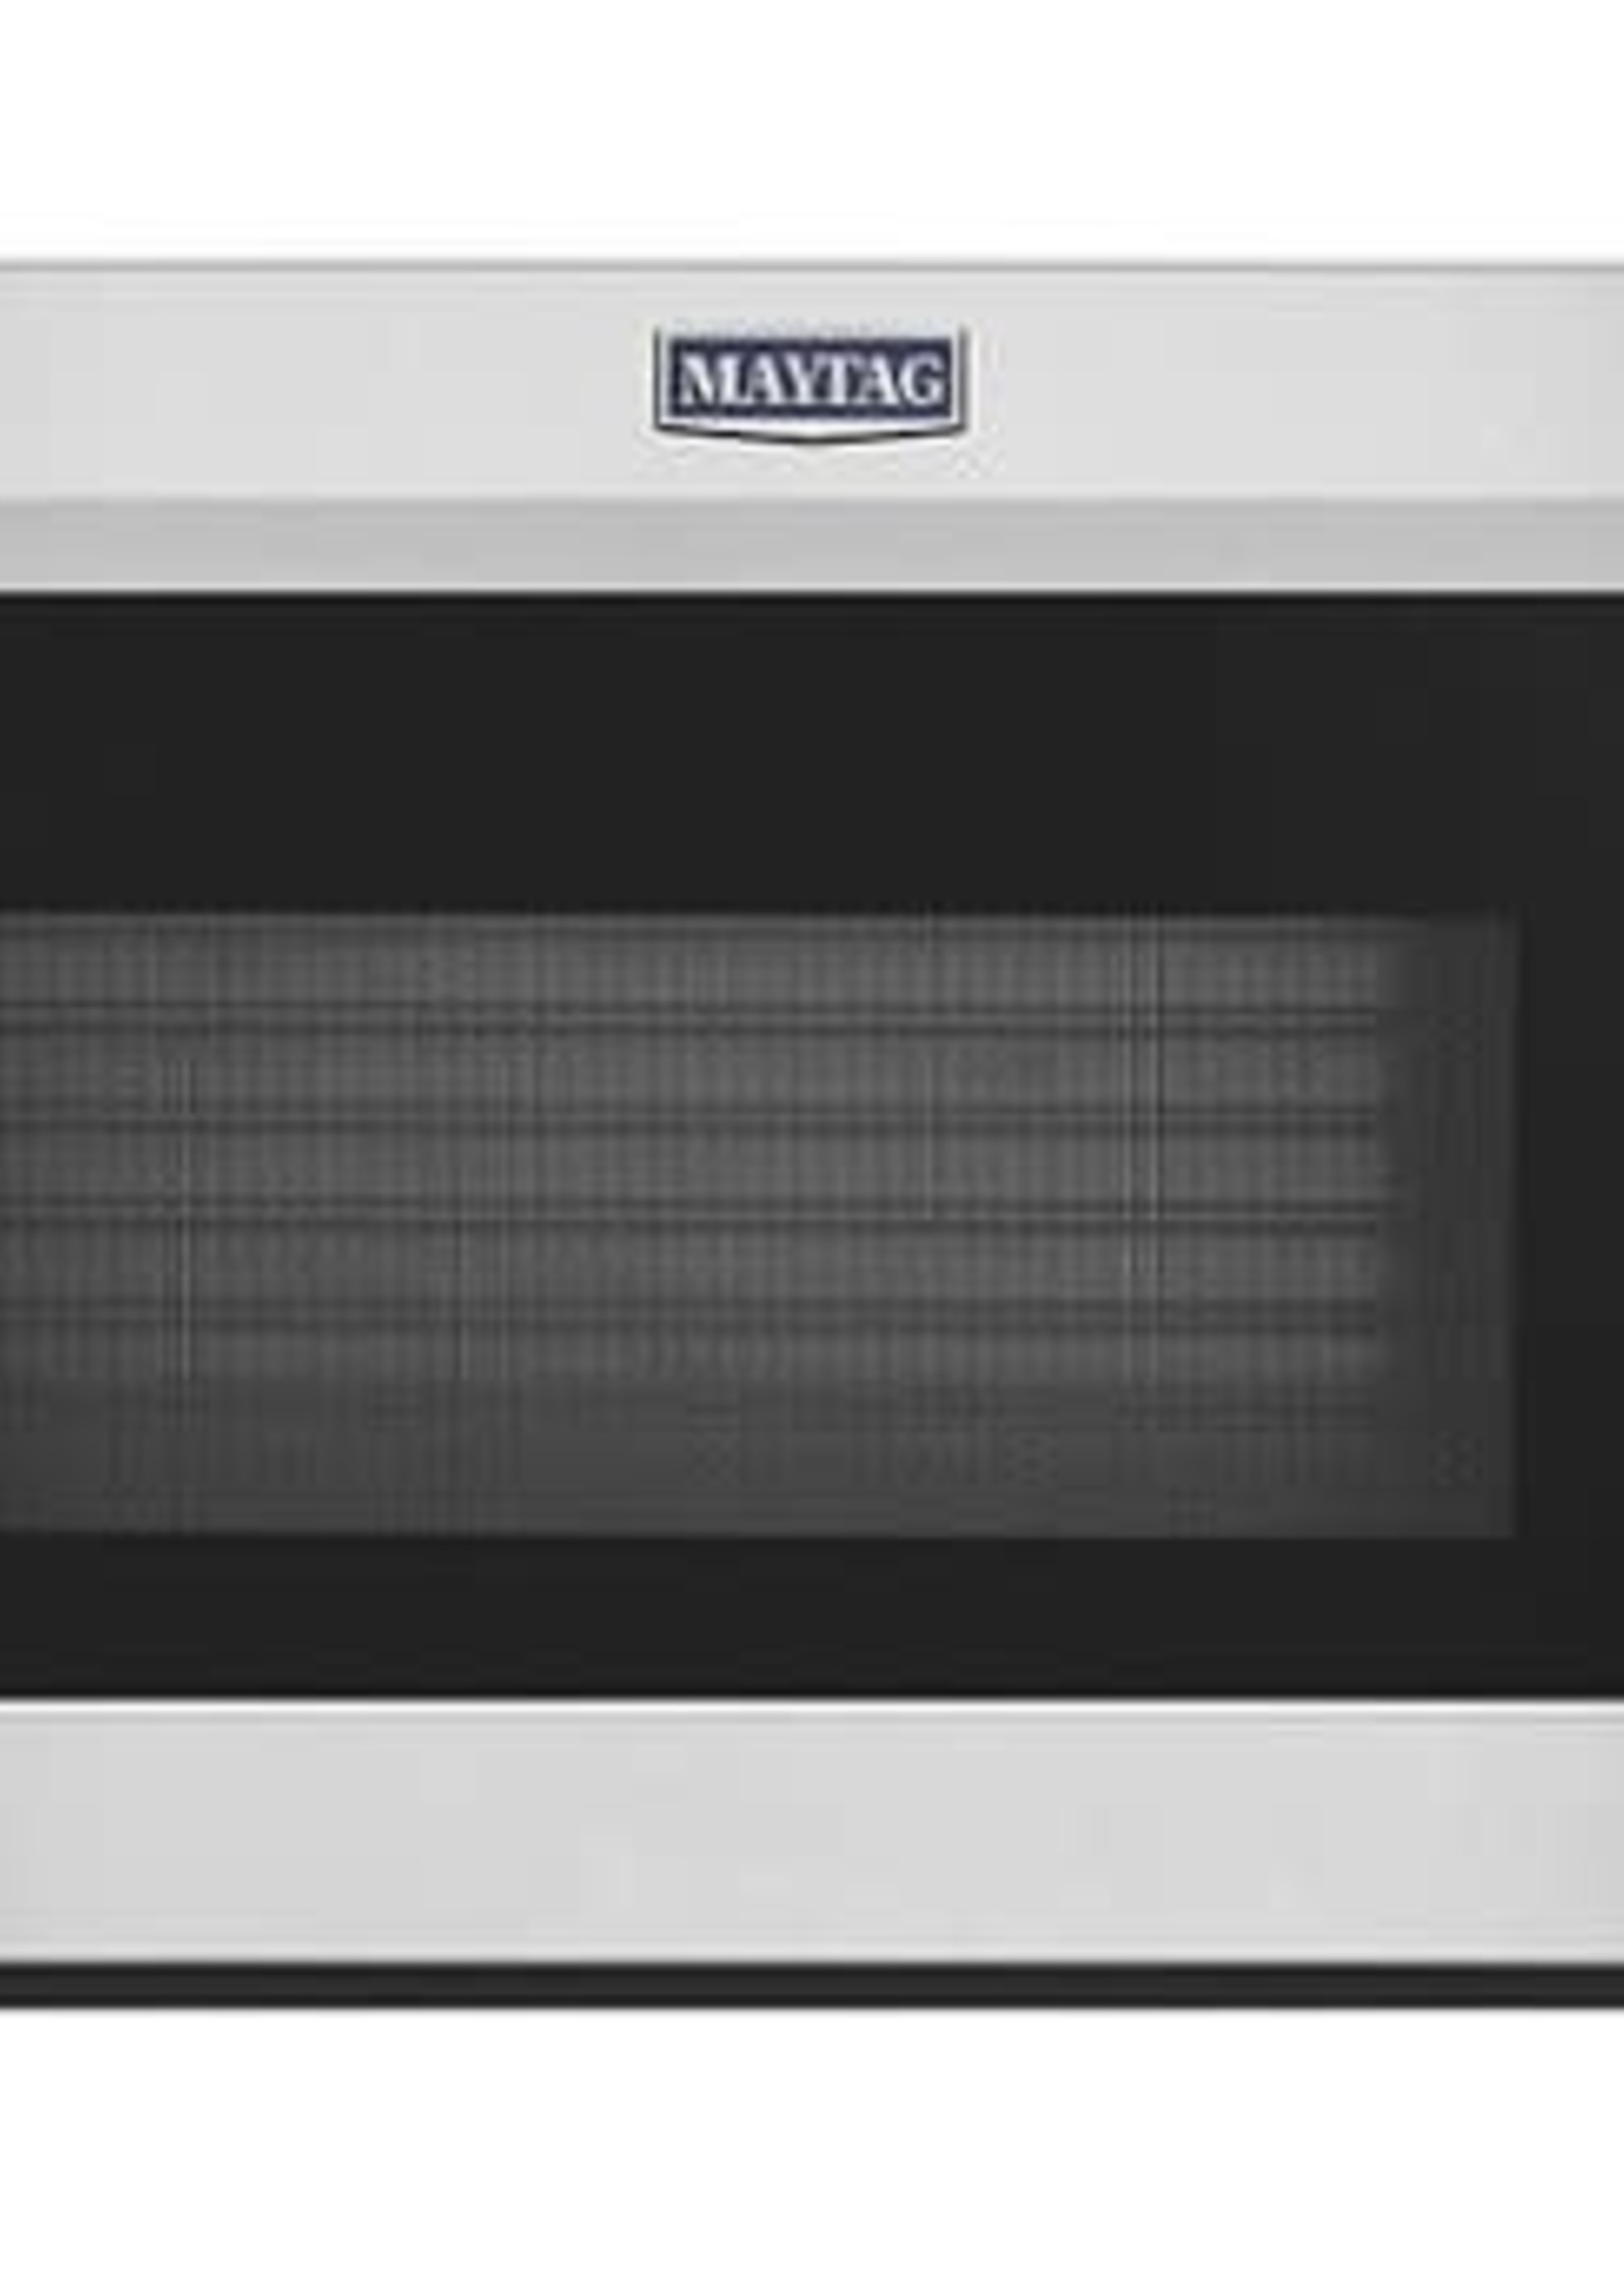 Maytag *Maytag MMV1175JZ  1.9 cu. ft. Over the Range Microwave with Stainless Steel Cavity in Fingerprint Resistant Stainless Steel